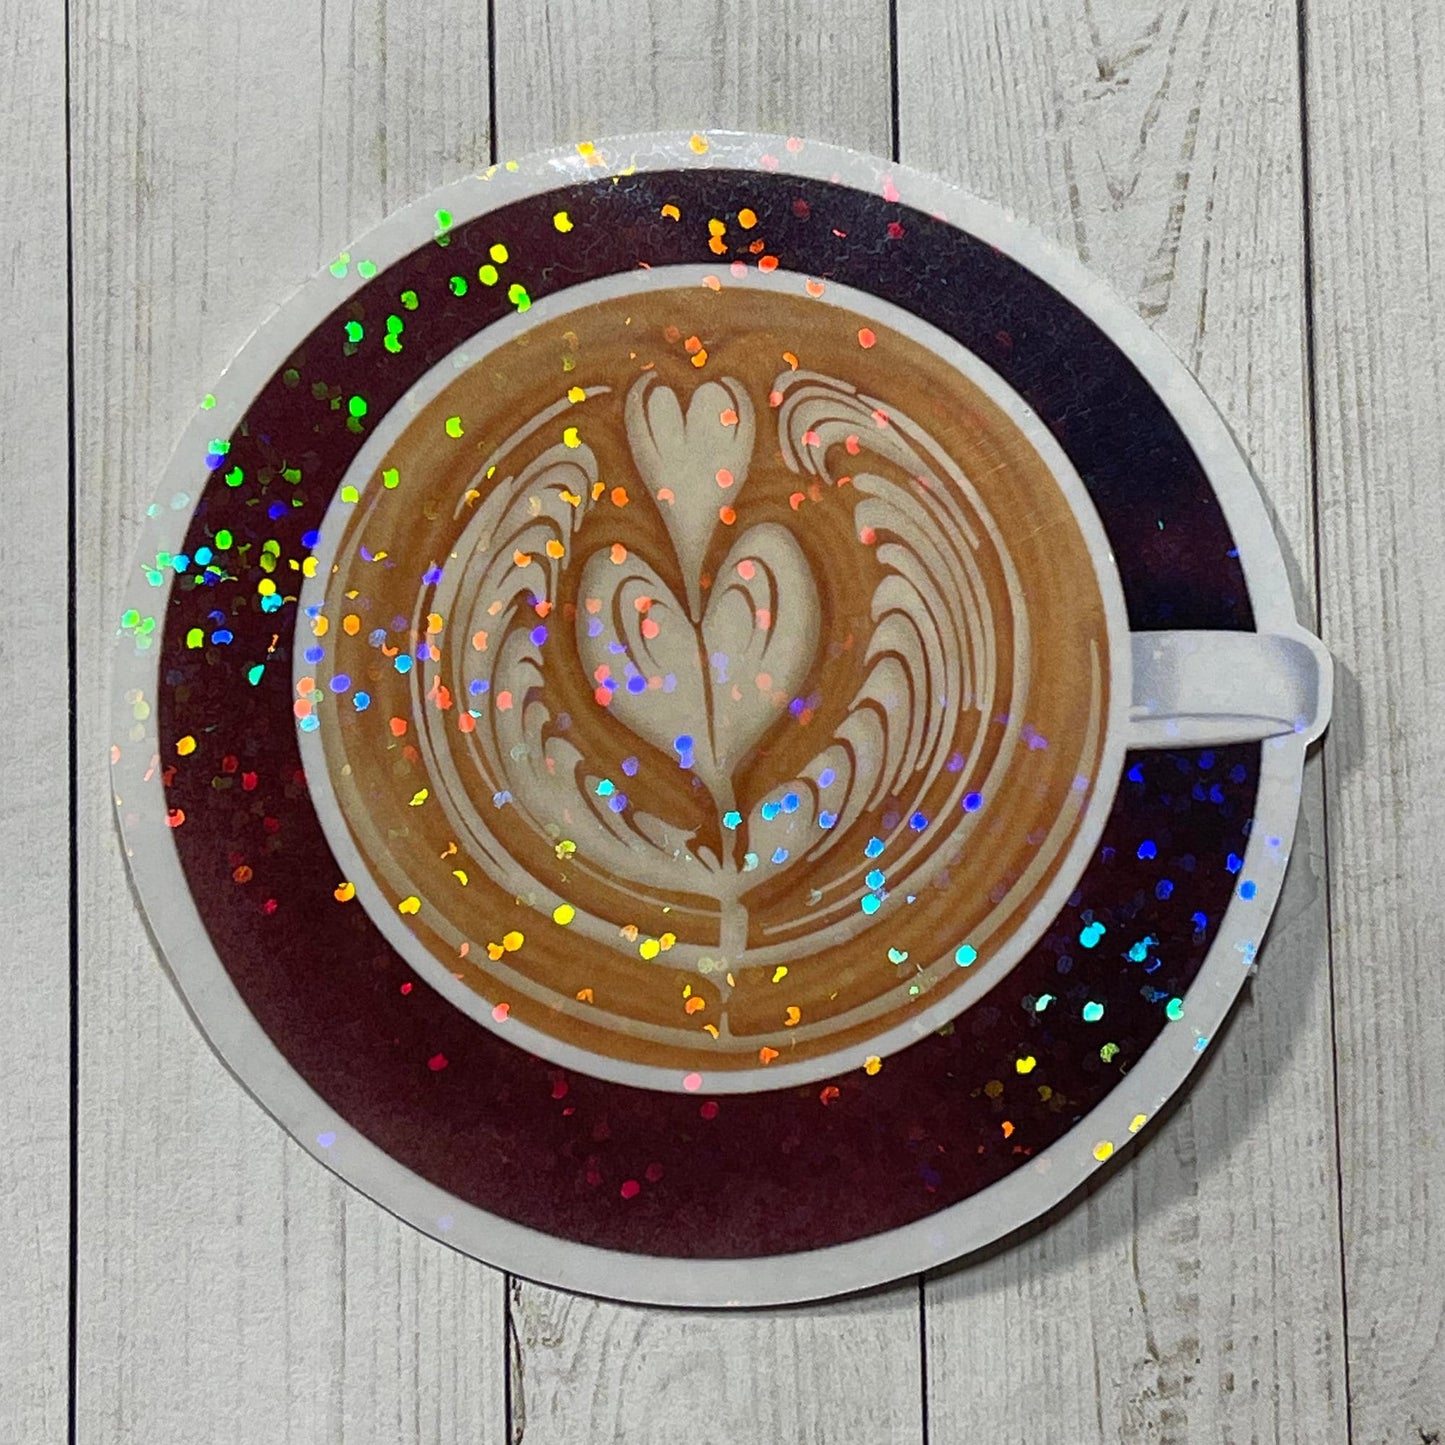 3 inch Latte Sticker, Autumn Journal Stickers, Kawaii Sticker, Coffee and Lattes Stickers, Holographic, Fall Aesthetic Coffee NOT WATERPROOF